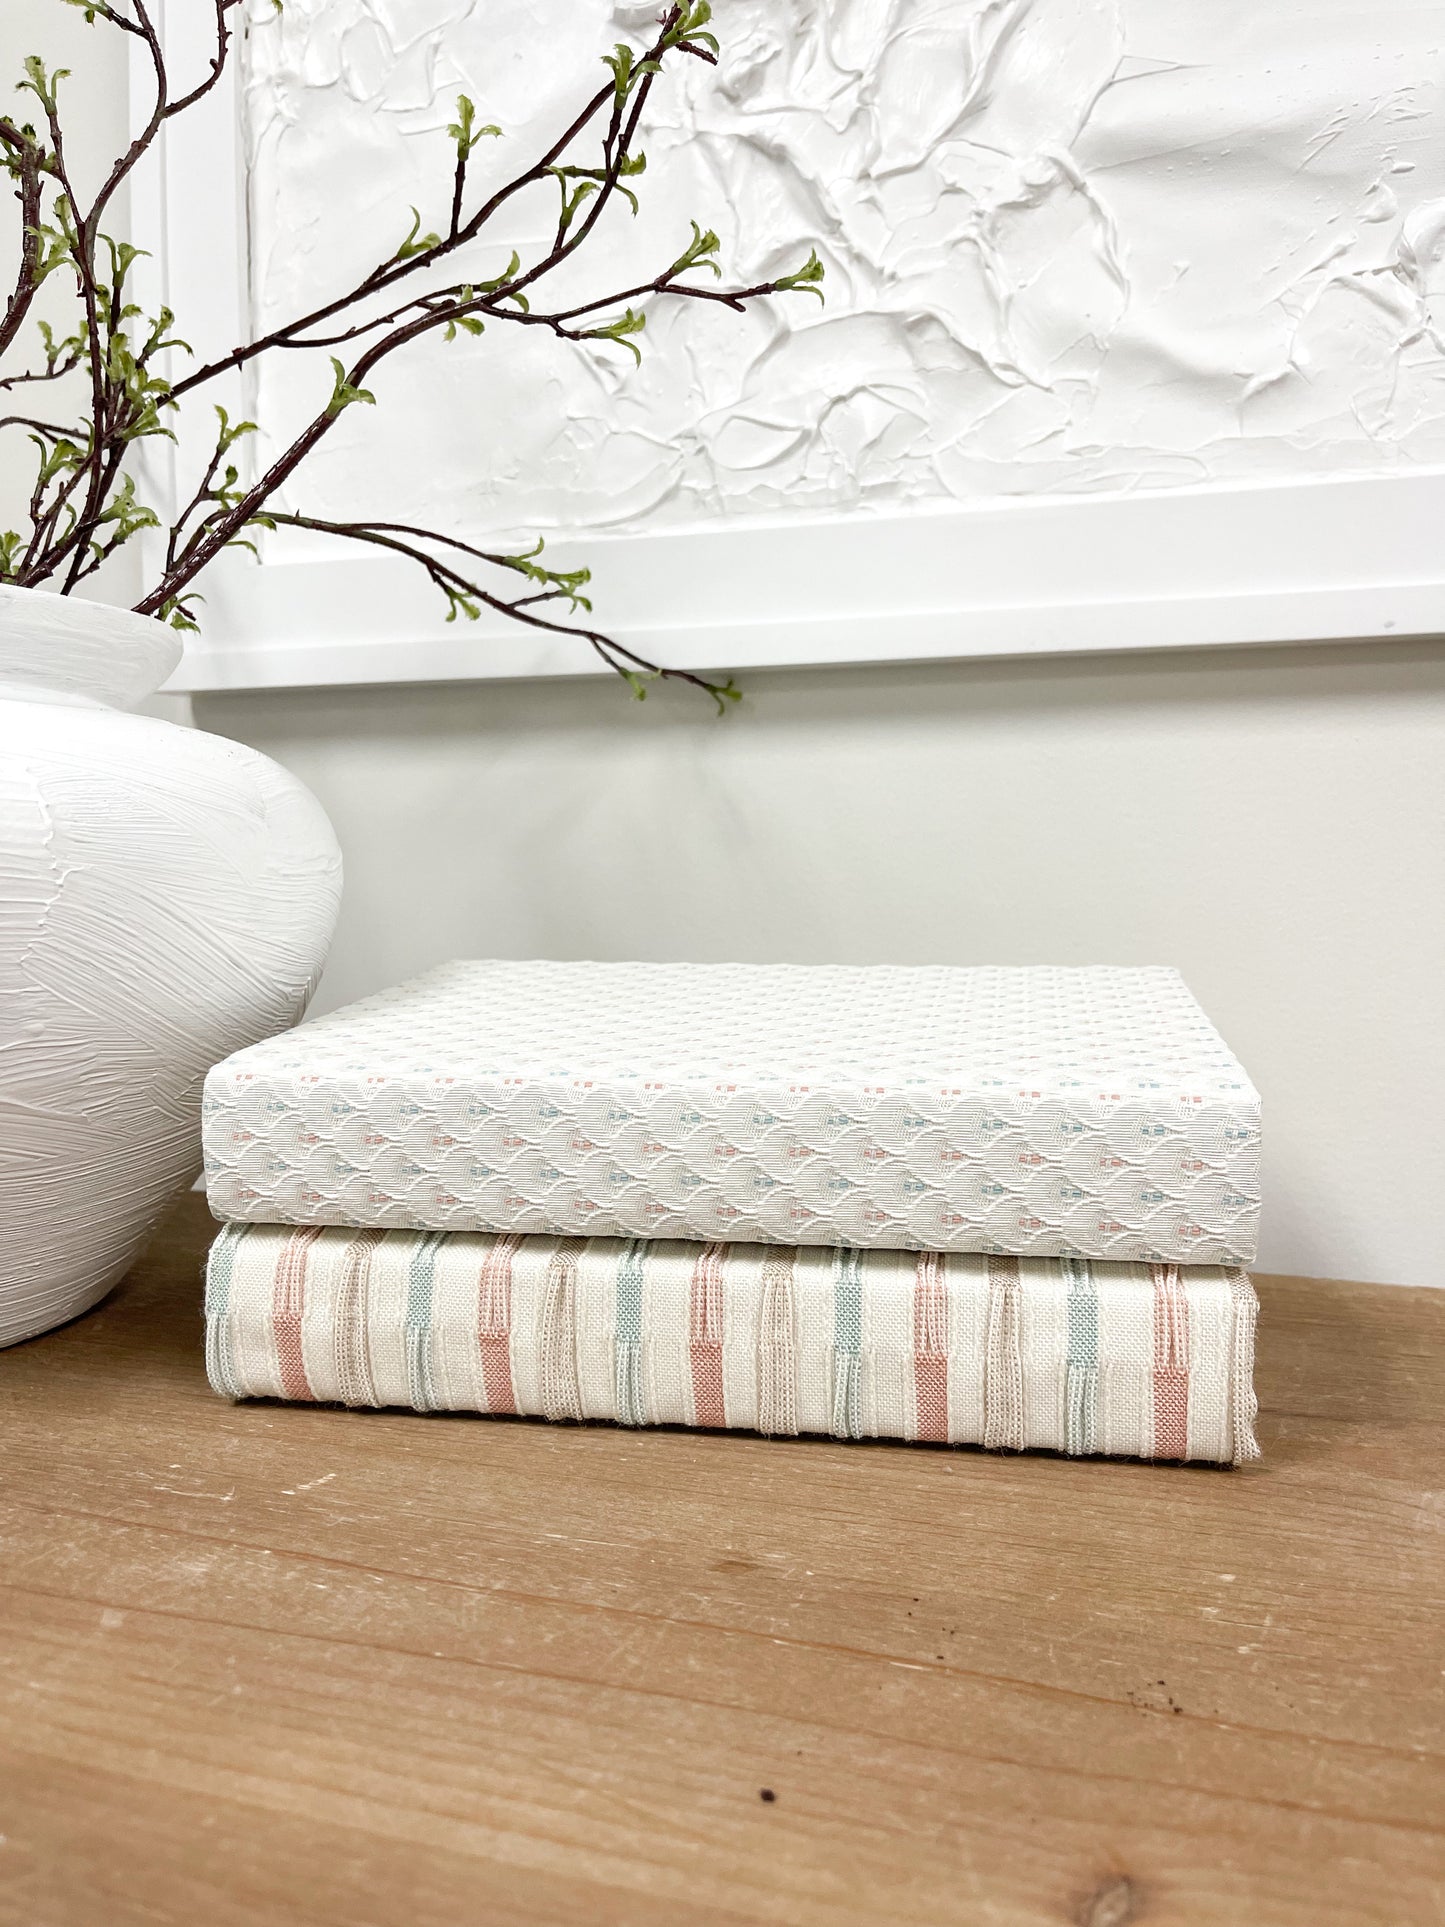 Fabric Covered Book Set